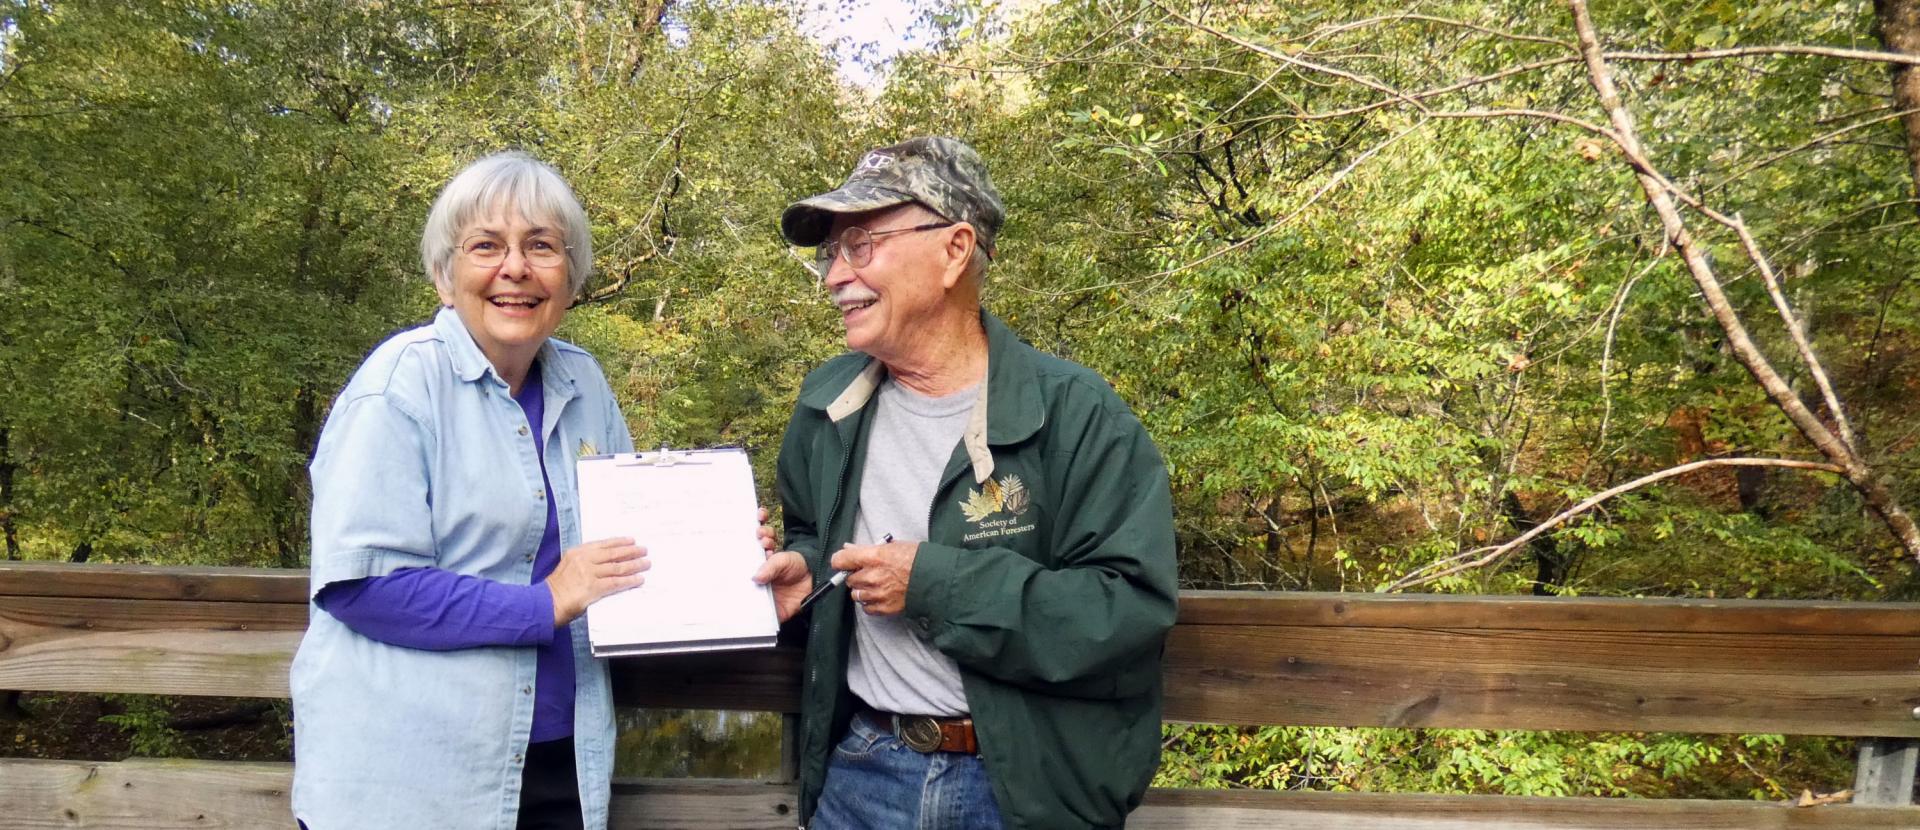 Mary and Judd Edeburn at a bridge in Duke Forest after signing their bequest intention.